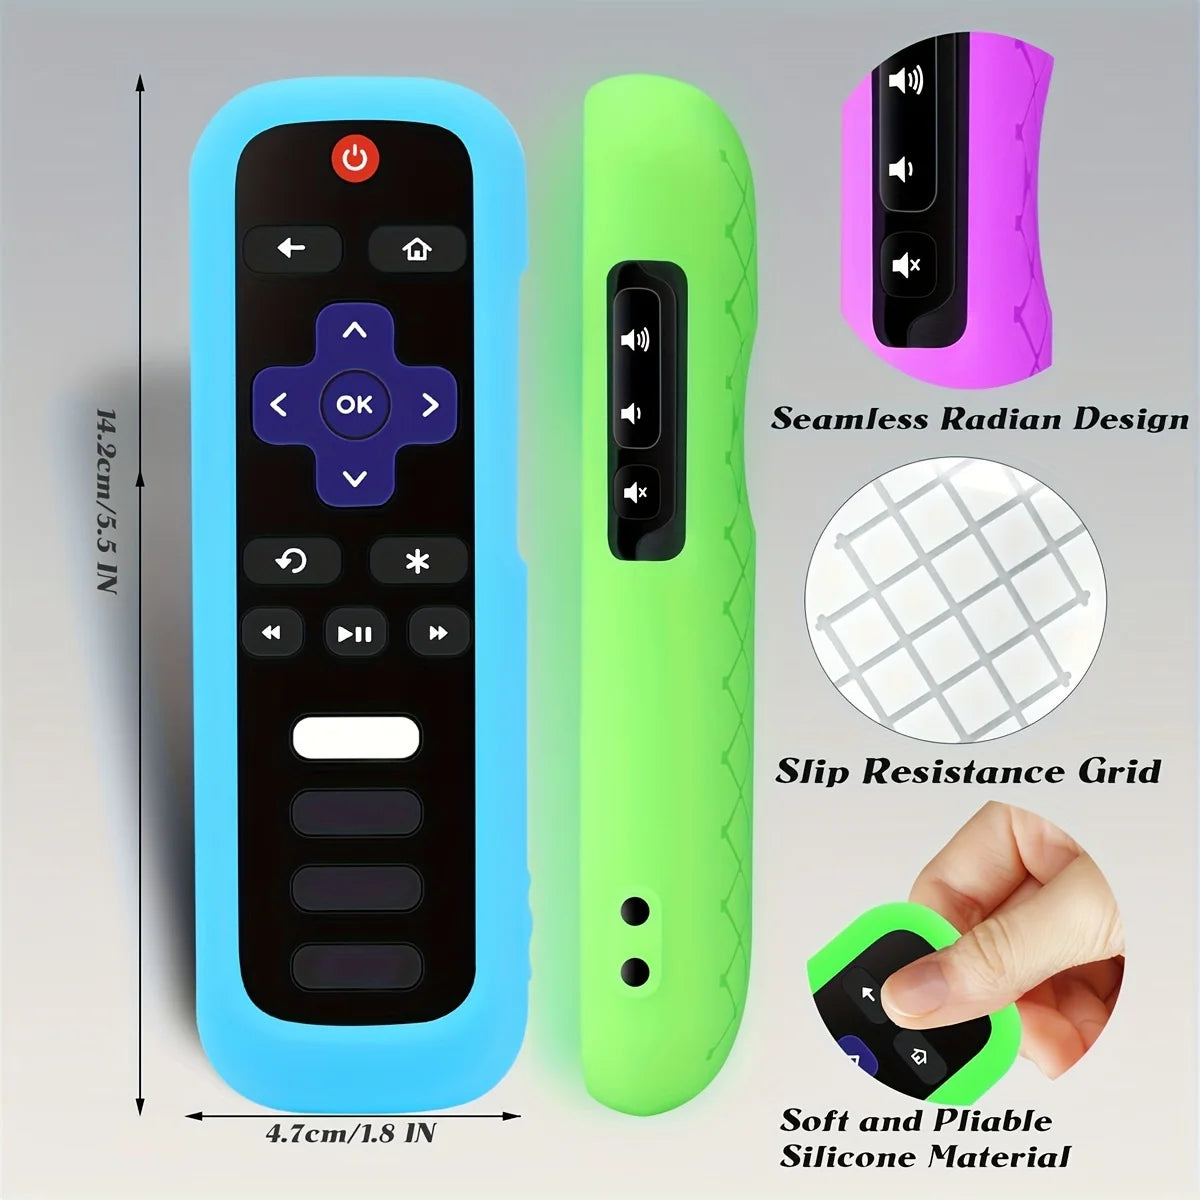 remote control, roku control, roku remote control, roku remote, roku tv remote control, roku tv remote, roku remote replacement